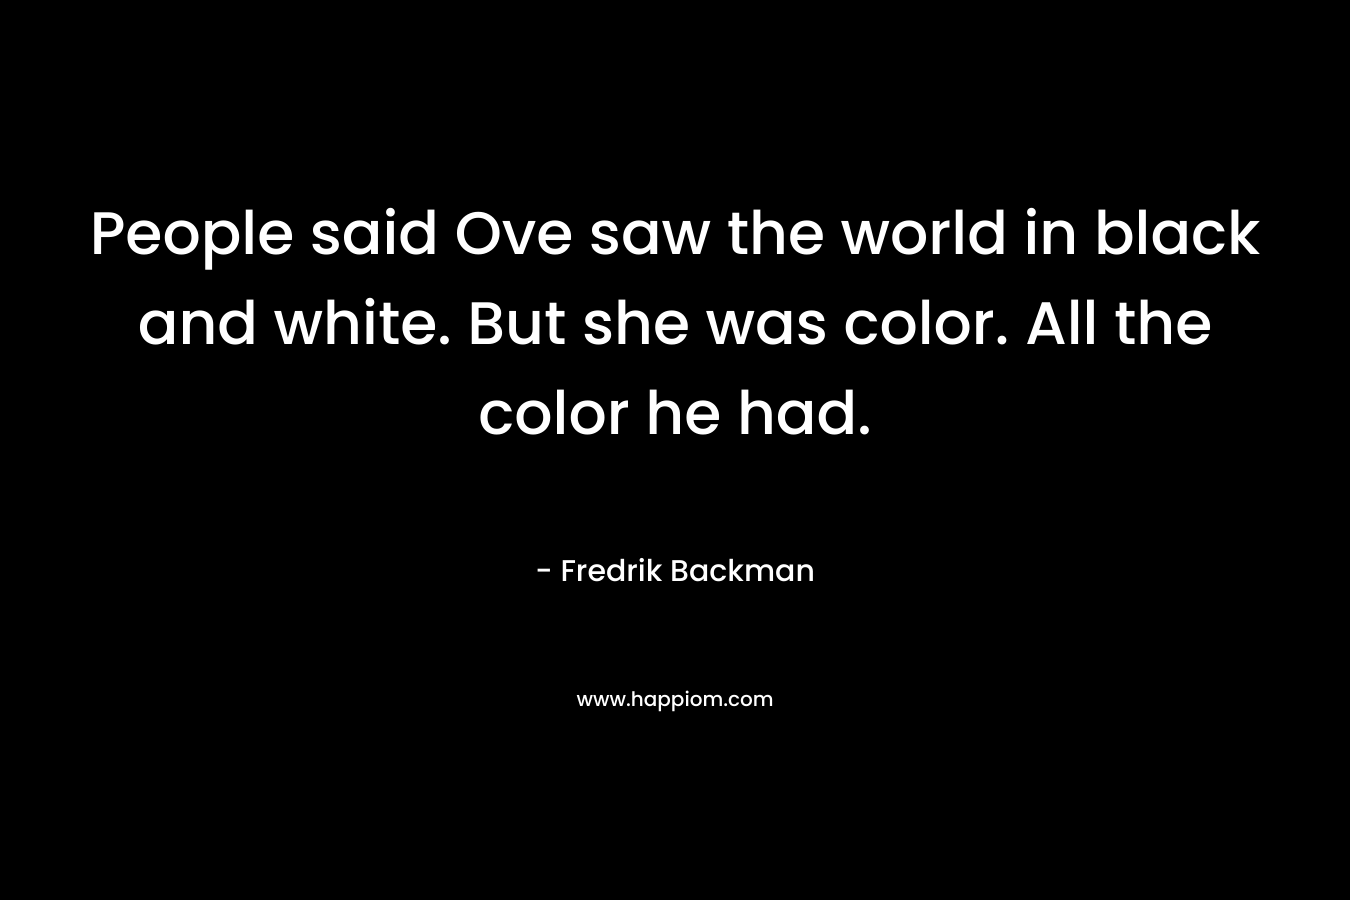 People said Ove saw the world in black and white. But she was color. All the color he had. – Fredrik Backman